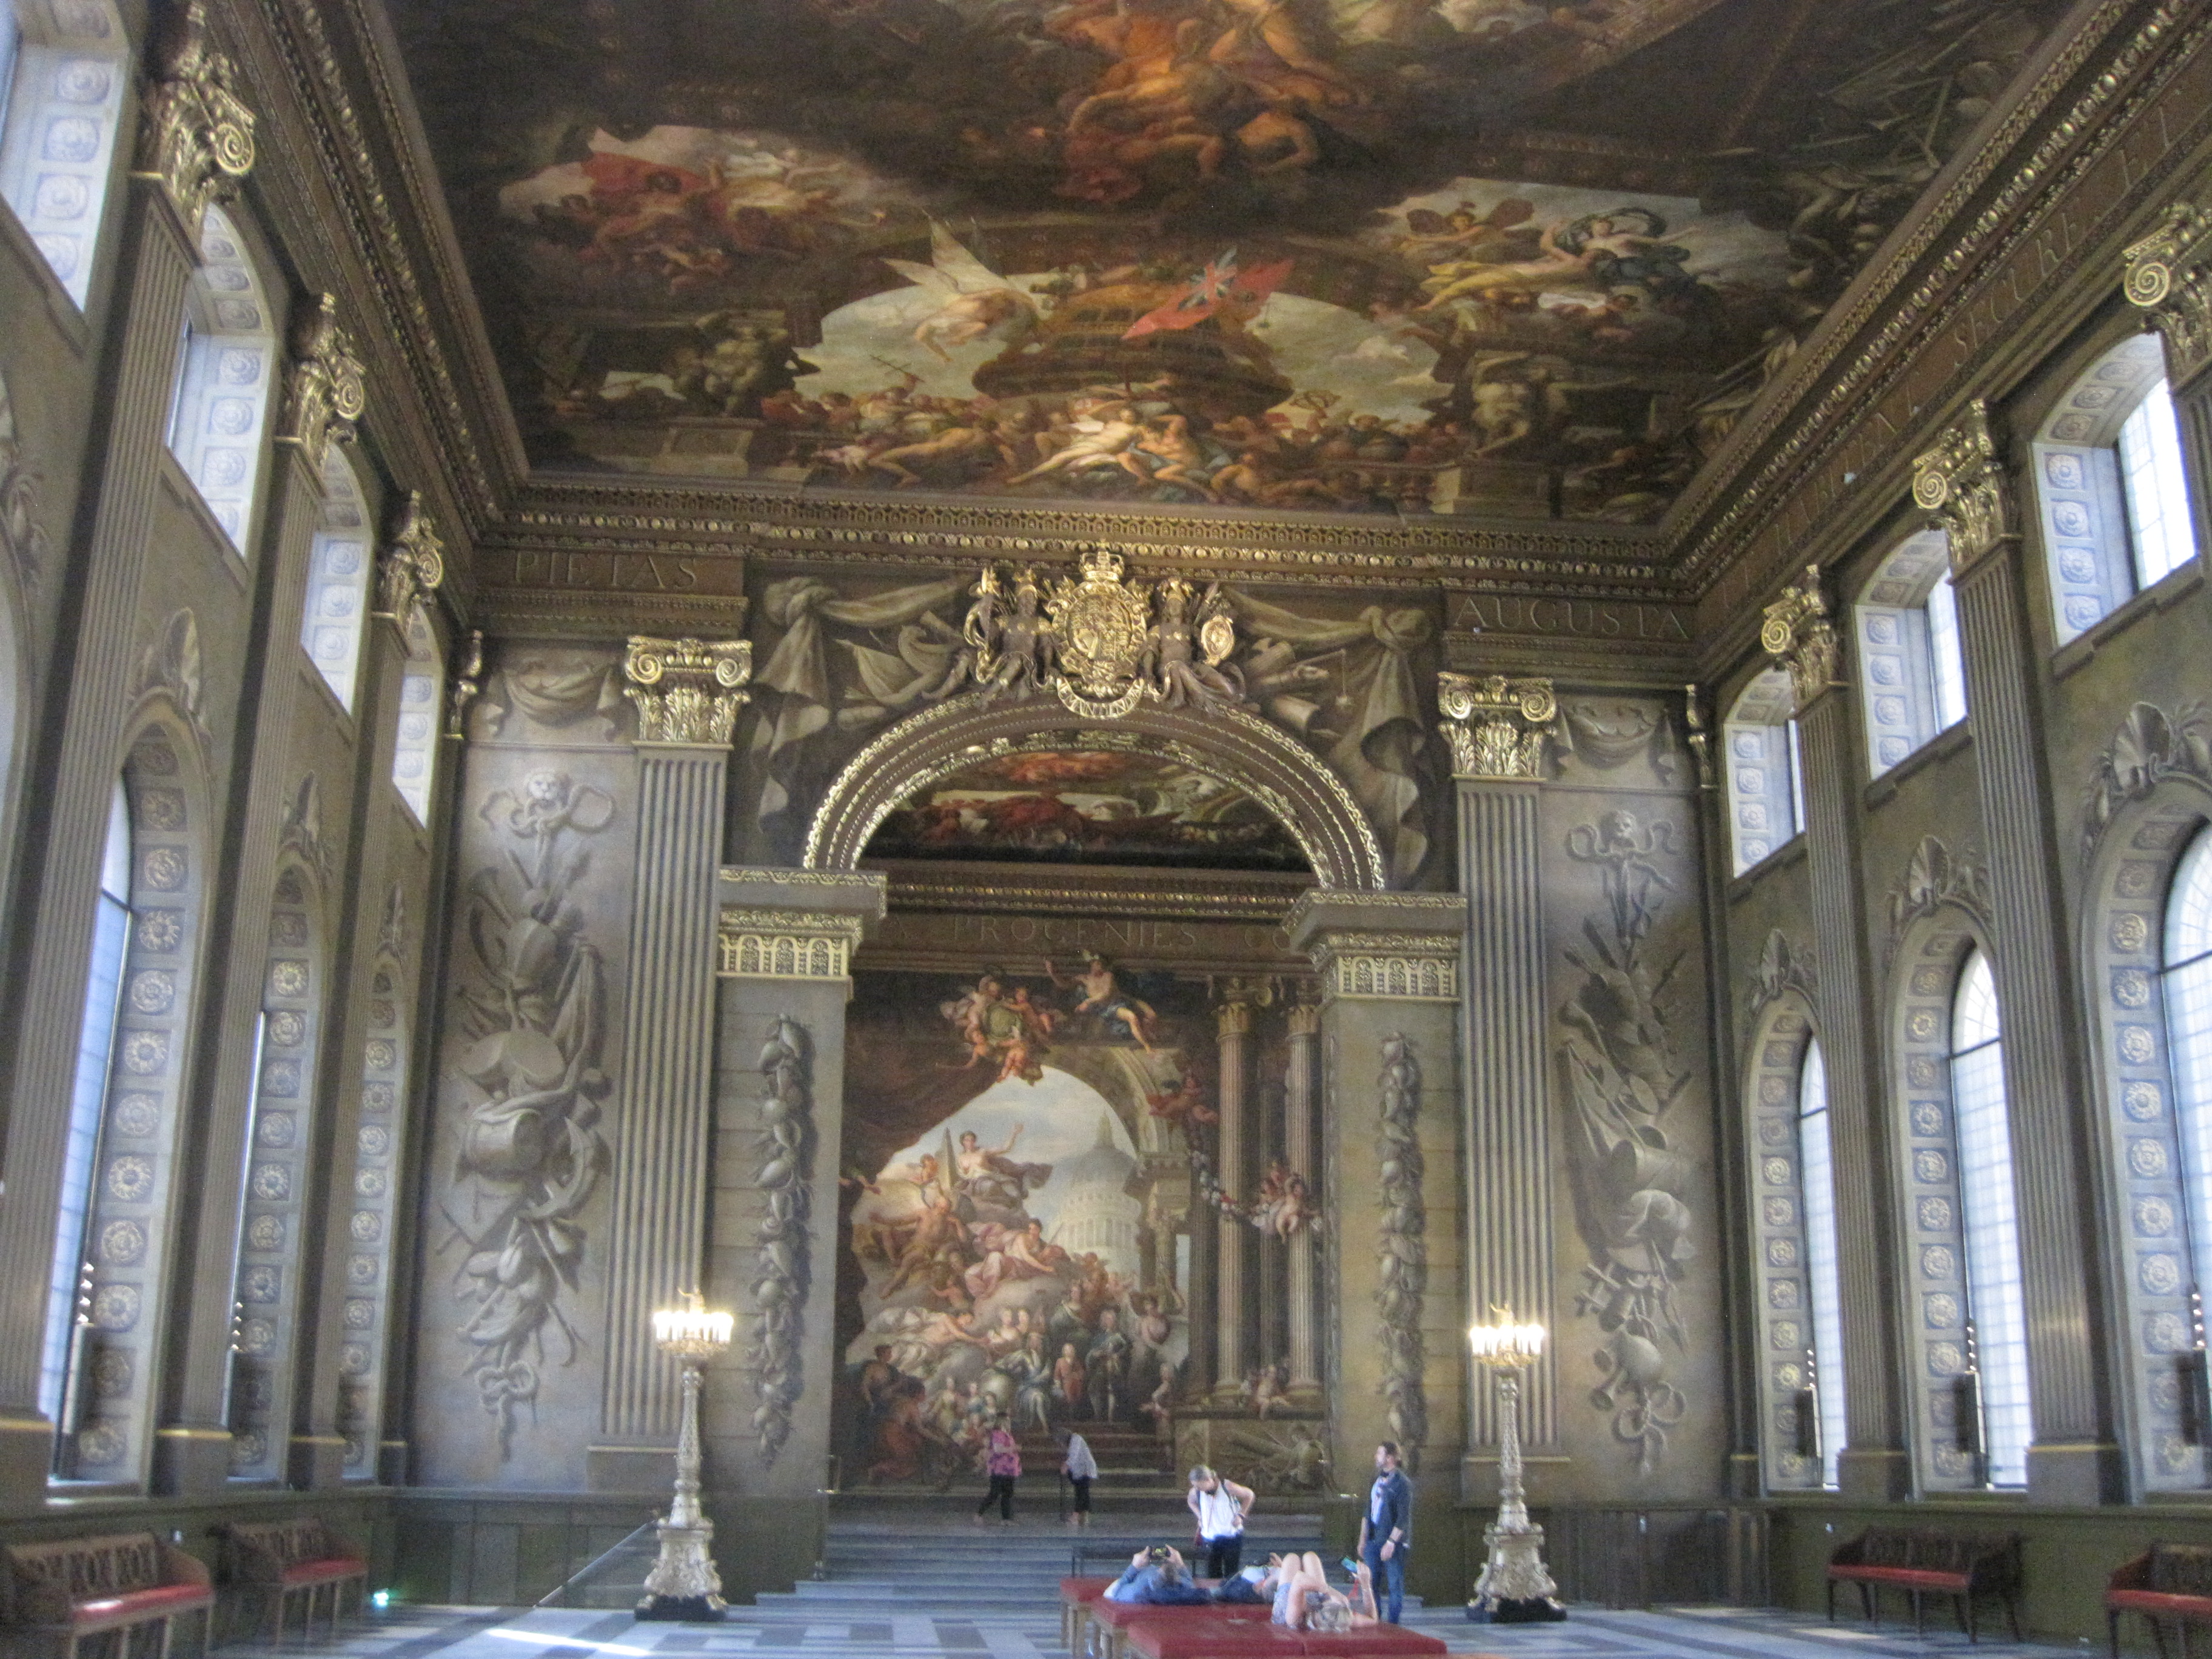 The Painted Hall - photo by Juliamaud